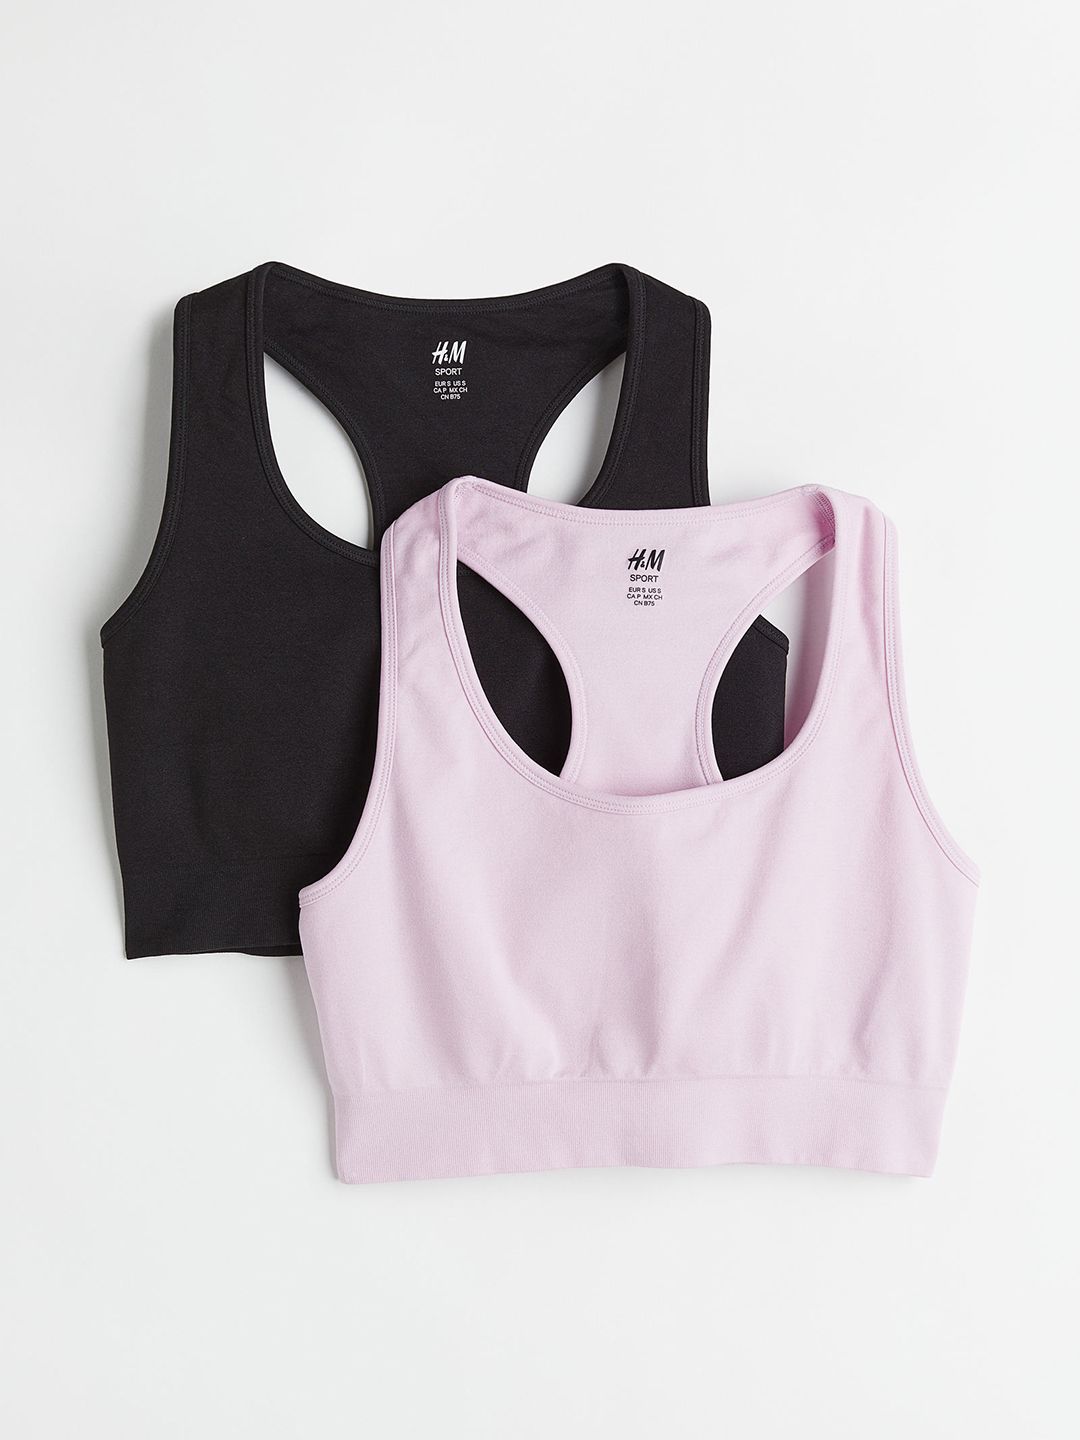 H&M Women Black & Pink 2-Pack Light Support Workout Bras Price in India